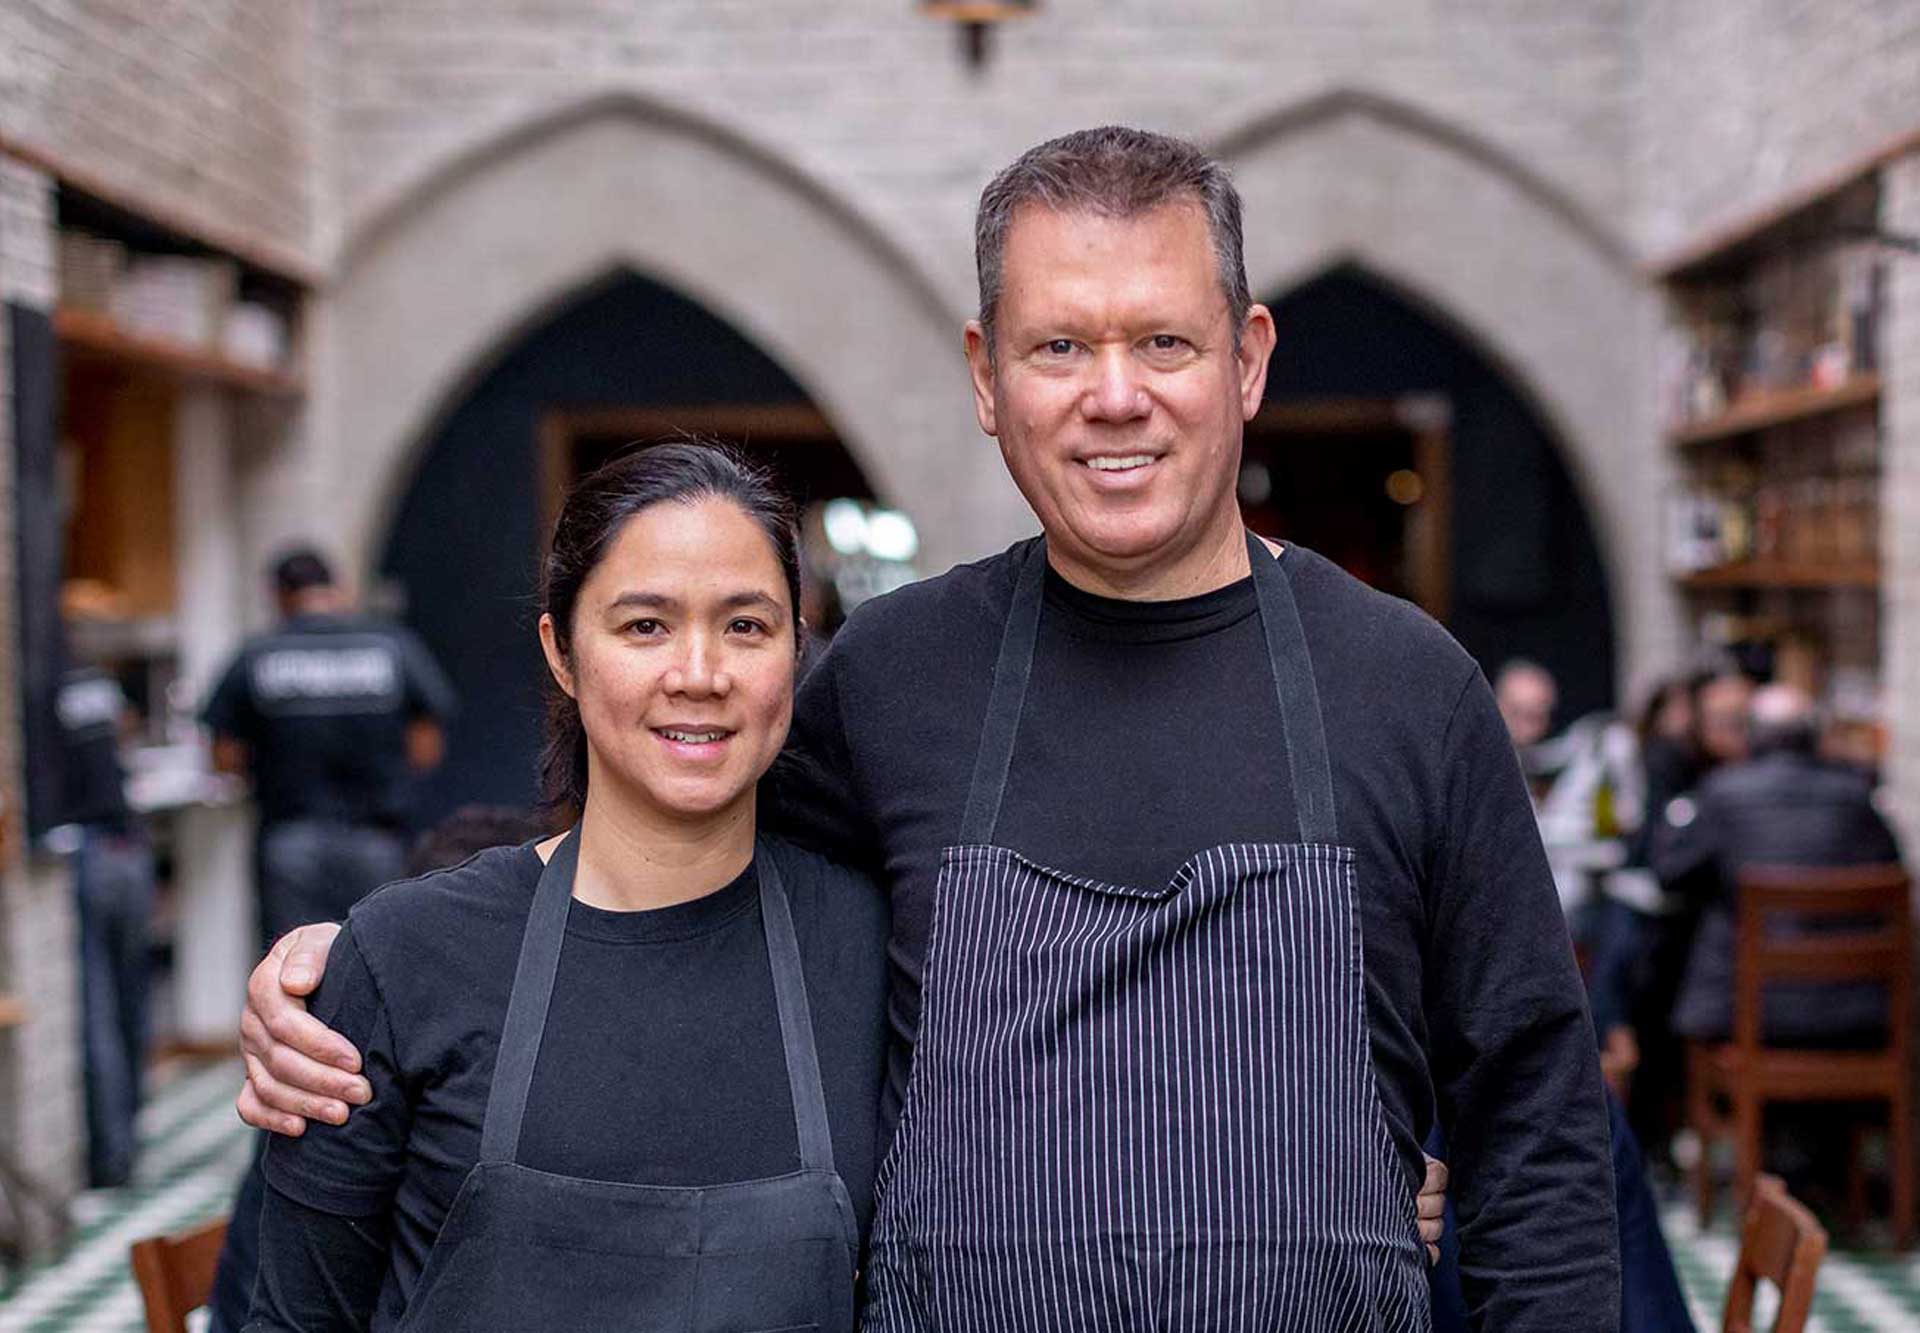 chef walter manzke and chef margarita manzke standing in the middle of the dining room at their restaurant republique